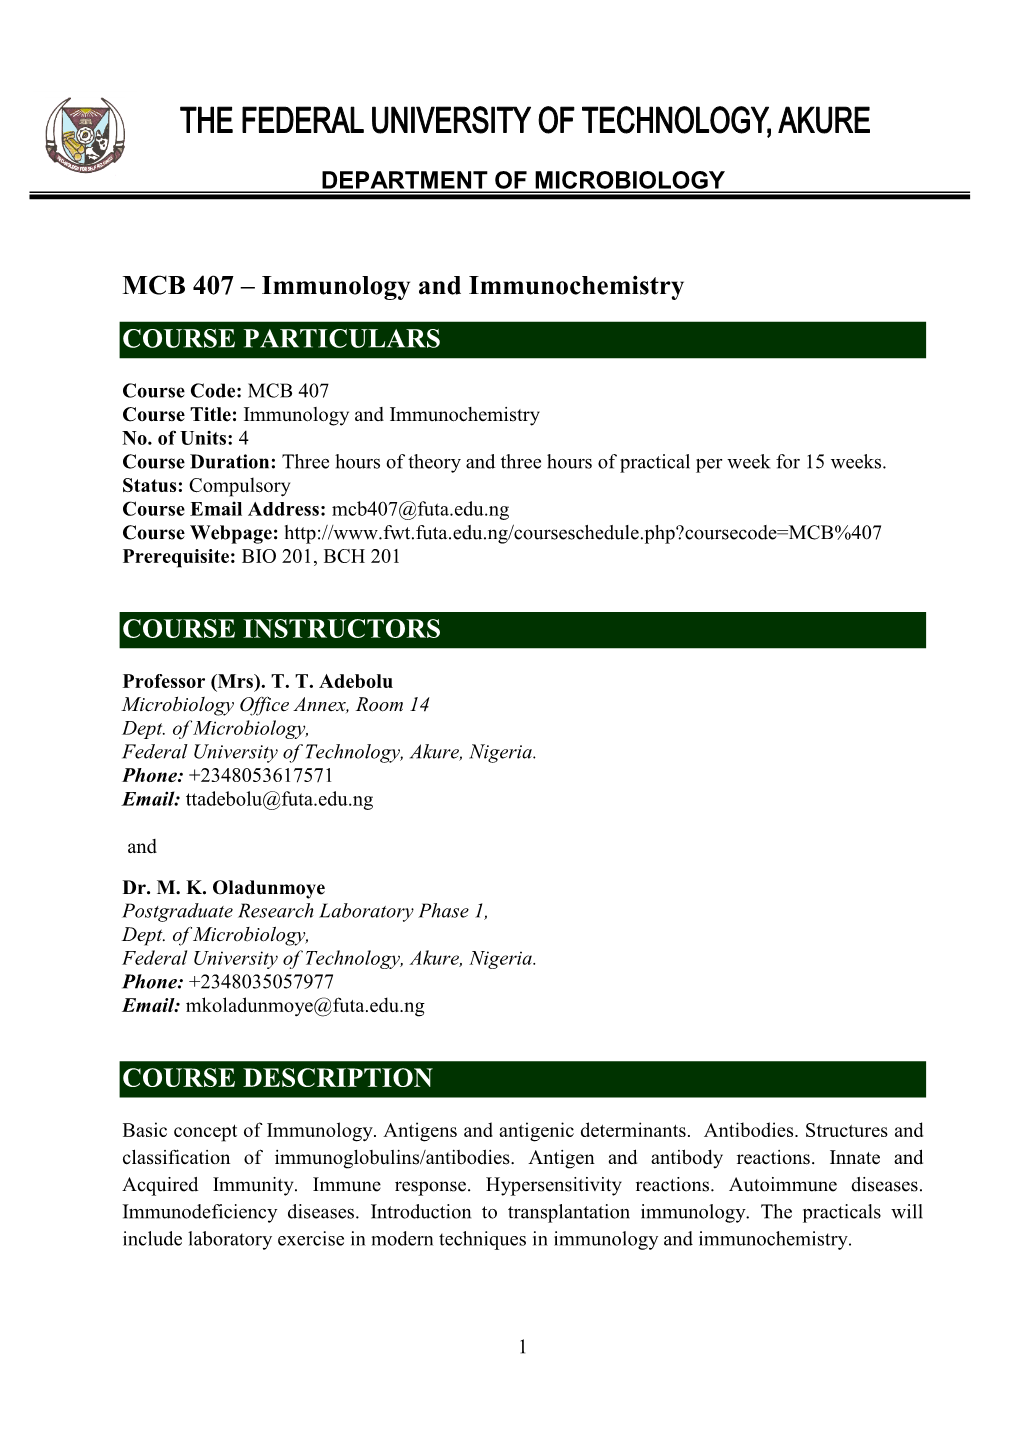 MCB 407 – Immunology and Immunochemistry COURSE PARTICULARS COURSE INSTRUCTORS COURSE DESCRIPTION